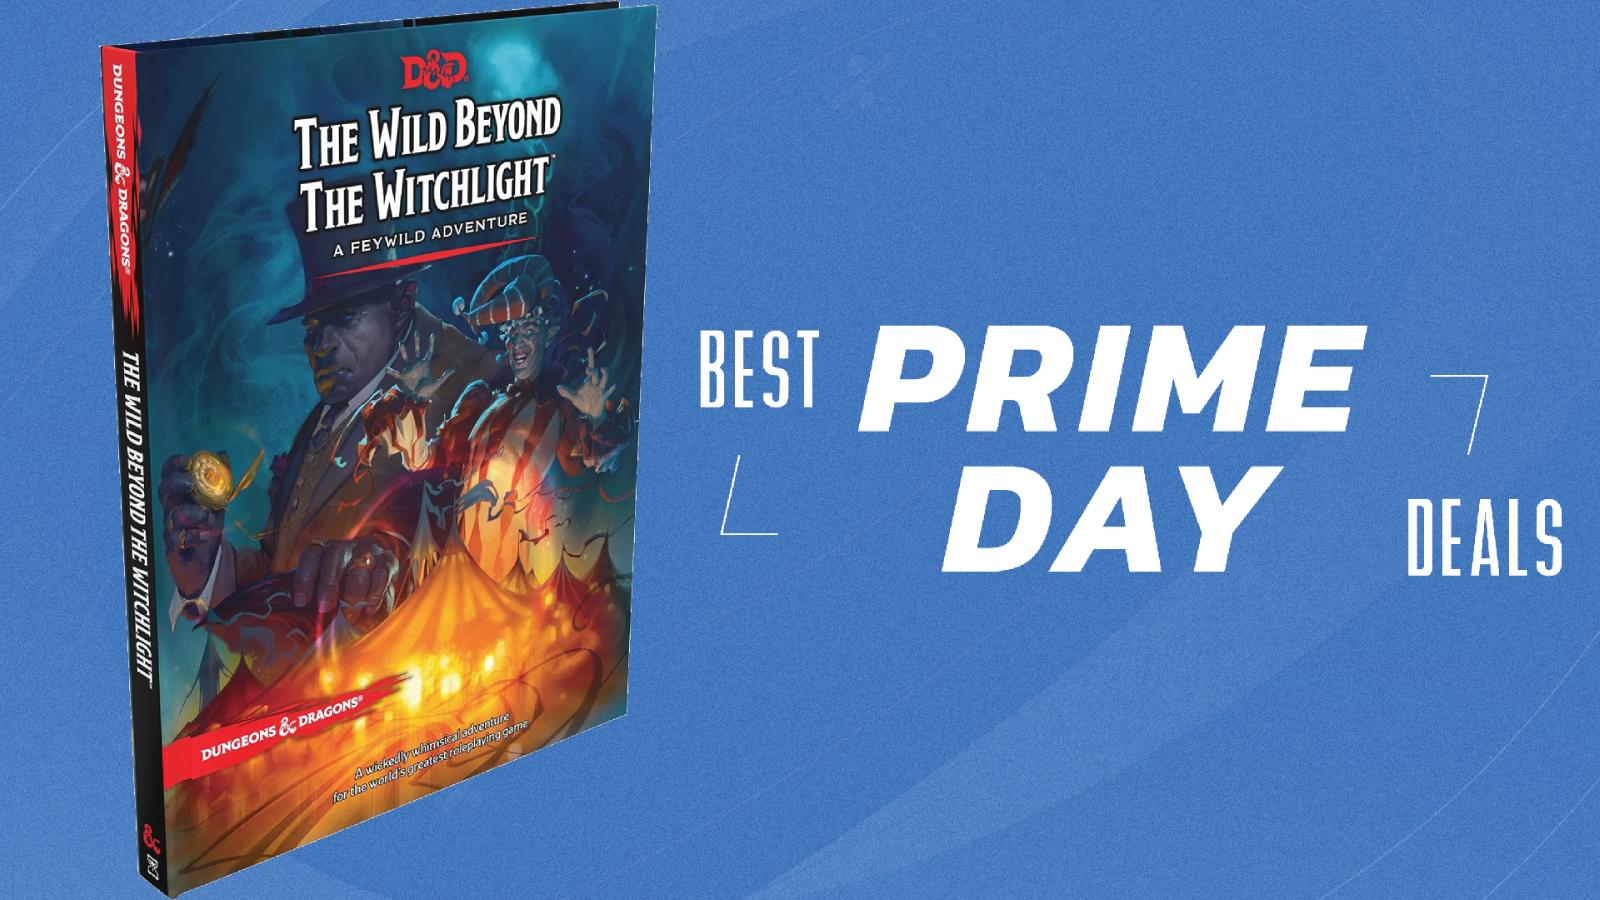 D&D Witchlight book on blue Prime Day background